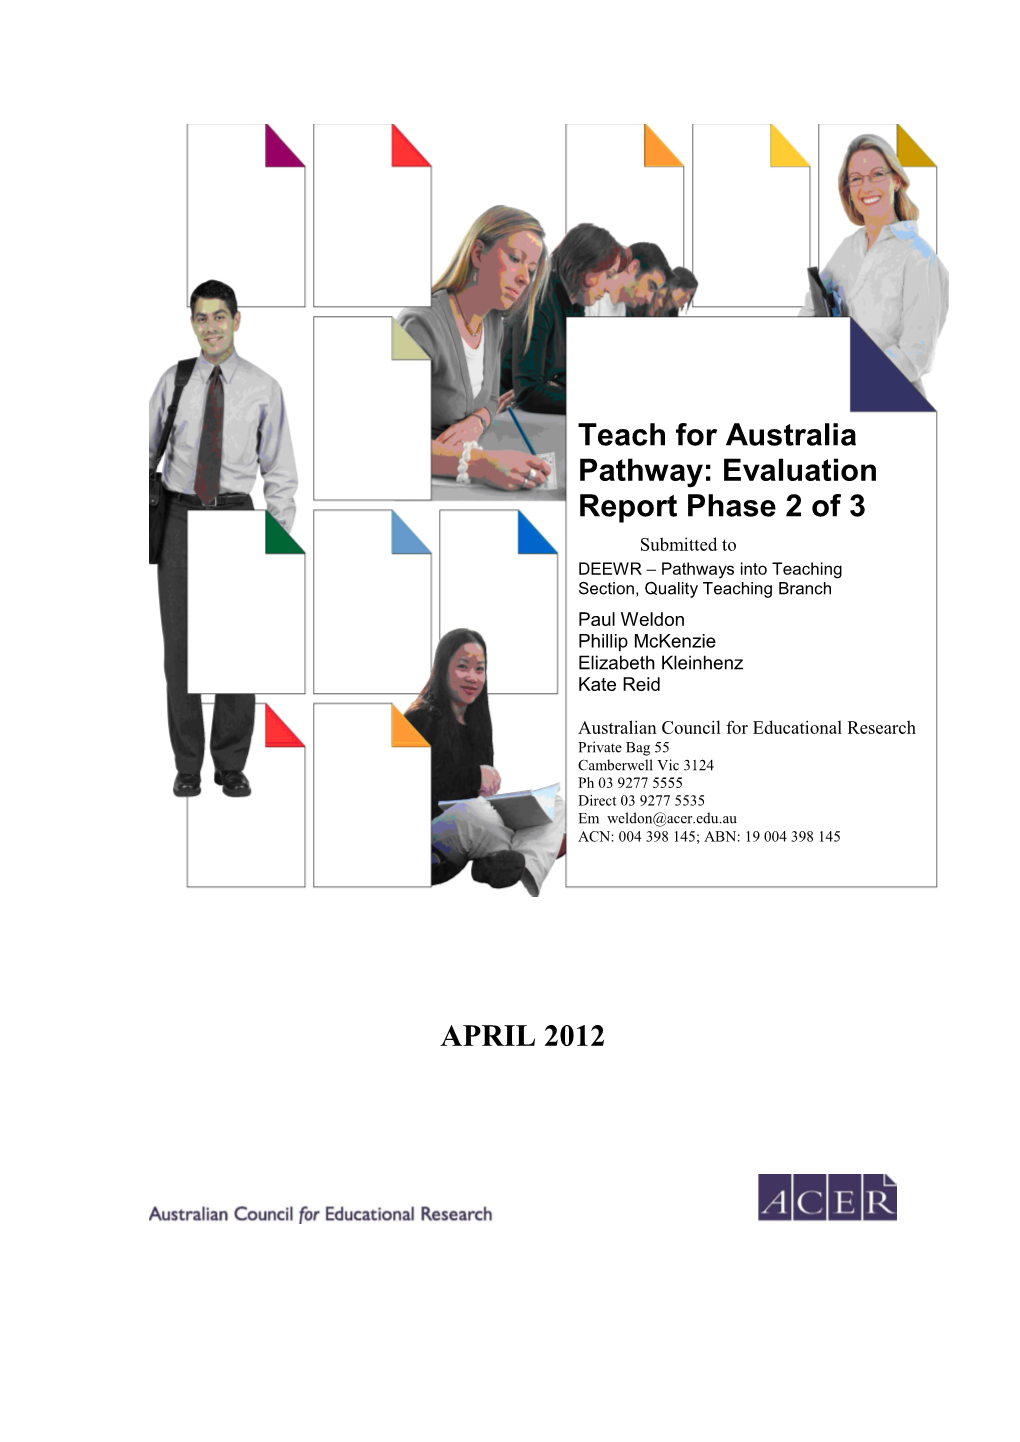 APRIL 2012 Teach for Australia Pathway: Evaluation Report Phase